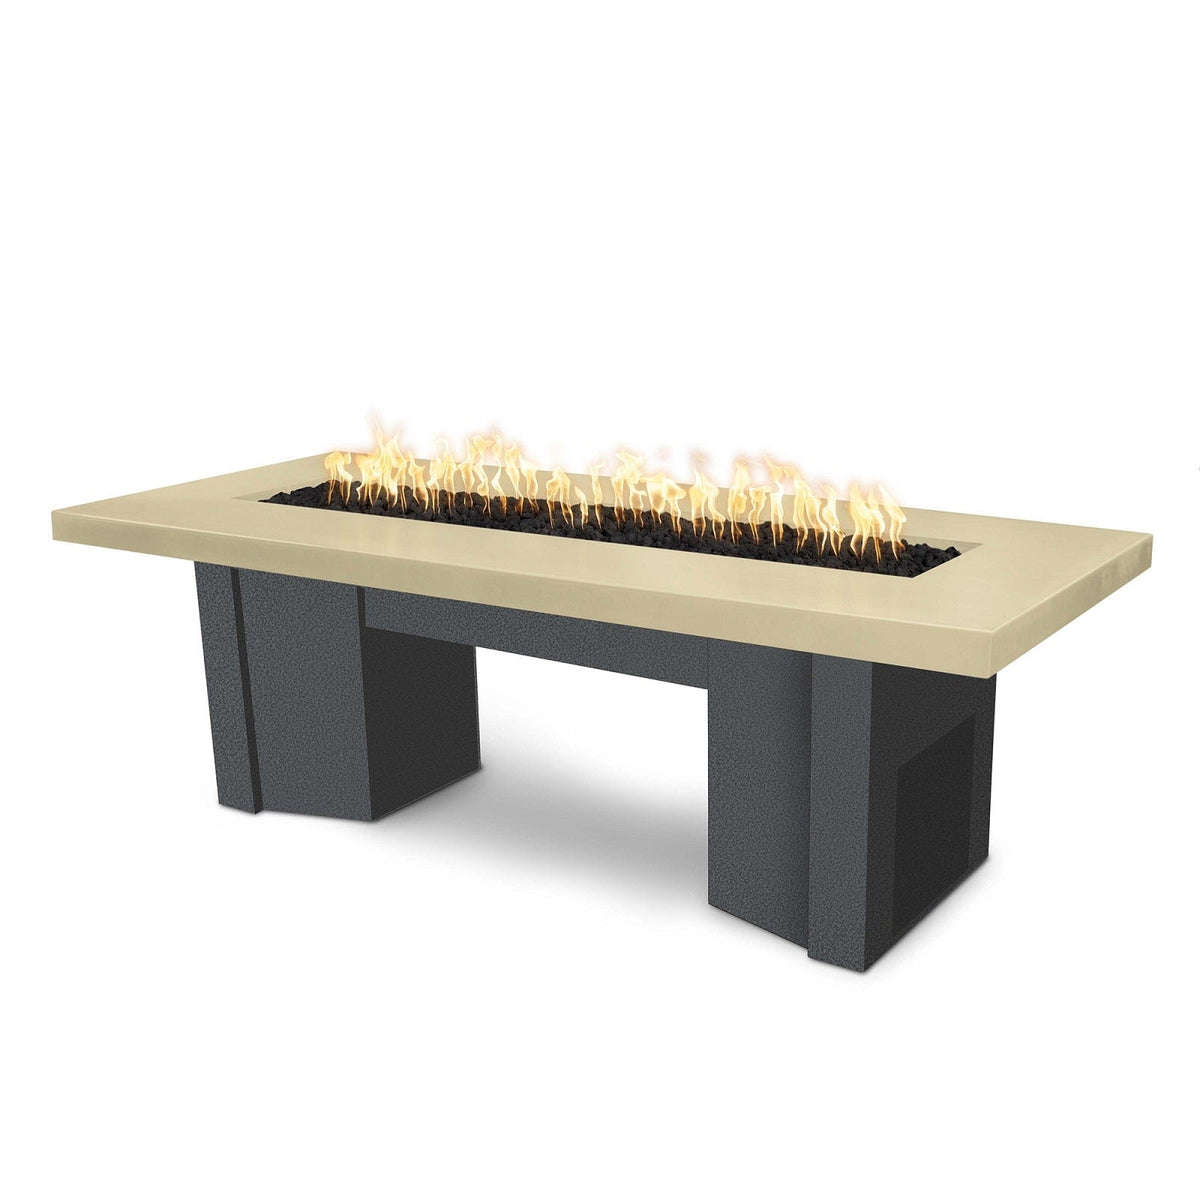 The Outdoor Plus Fire Features Vanilla (-VAN) / Silver Vein Powder Coated Steel (-SLV) The Outdoor Plus 78&quot; Alameda Fire Table Smooth Concrete in Natural Gas - Flame Sense System with Push Button Spark Igniter / OPT-ALMGFRC78FSEN-NG